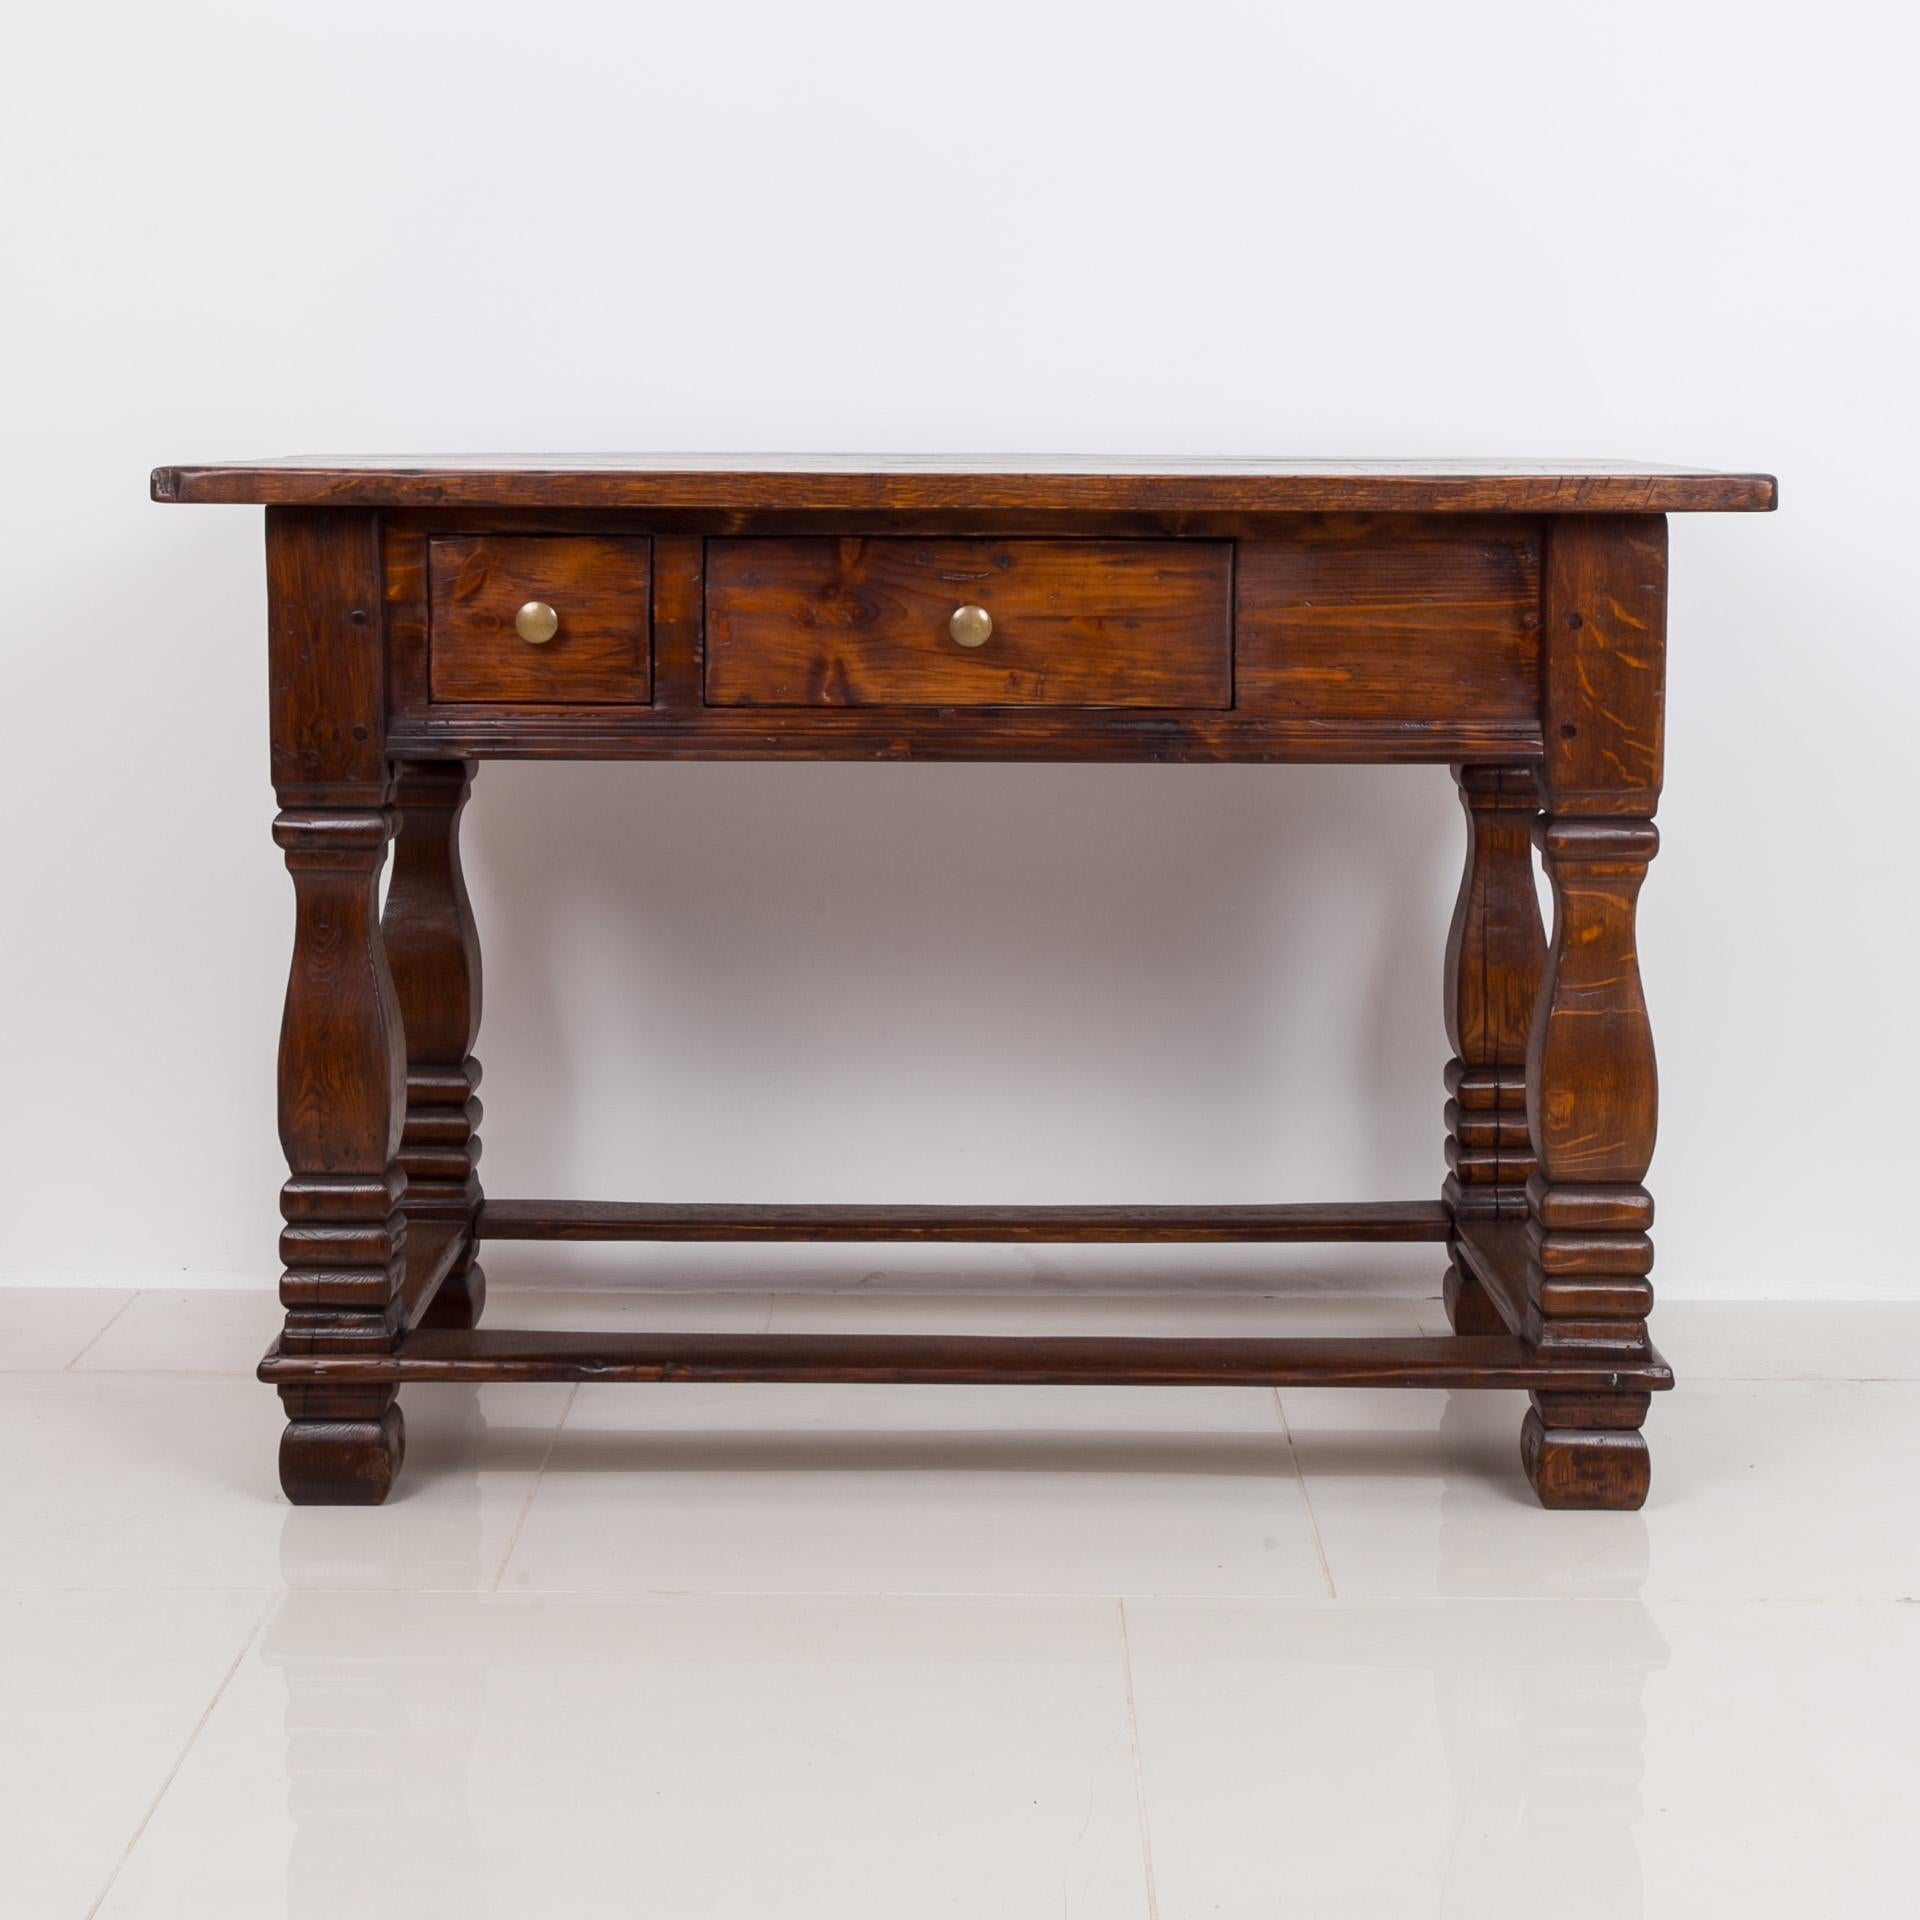 This gorgeous antique table was made around late 18th or early 19th Century. The whole piece is made of solid oak. Six wide oak boards comprise the table’s top. The top is set on a solid base with a wide apron that reveals two drawers for practical